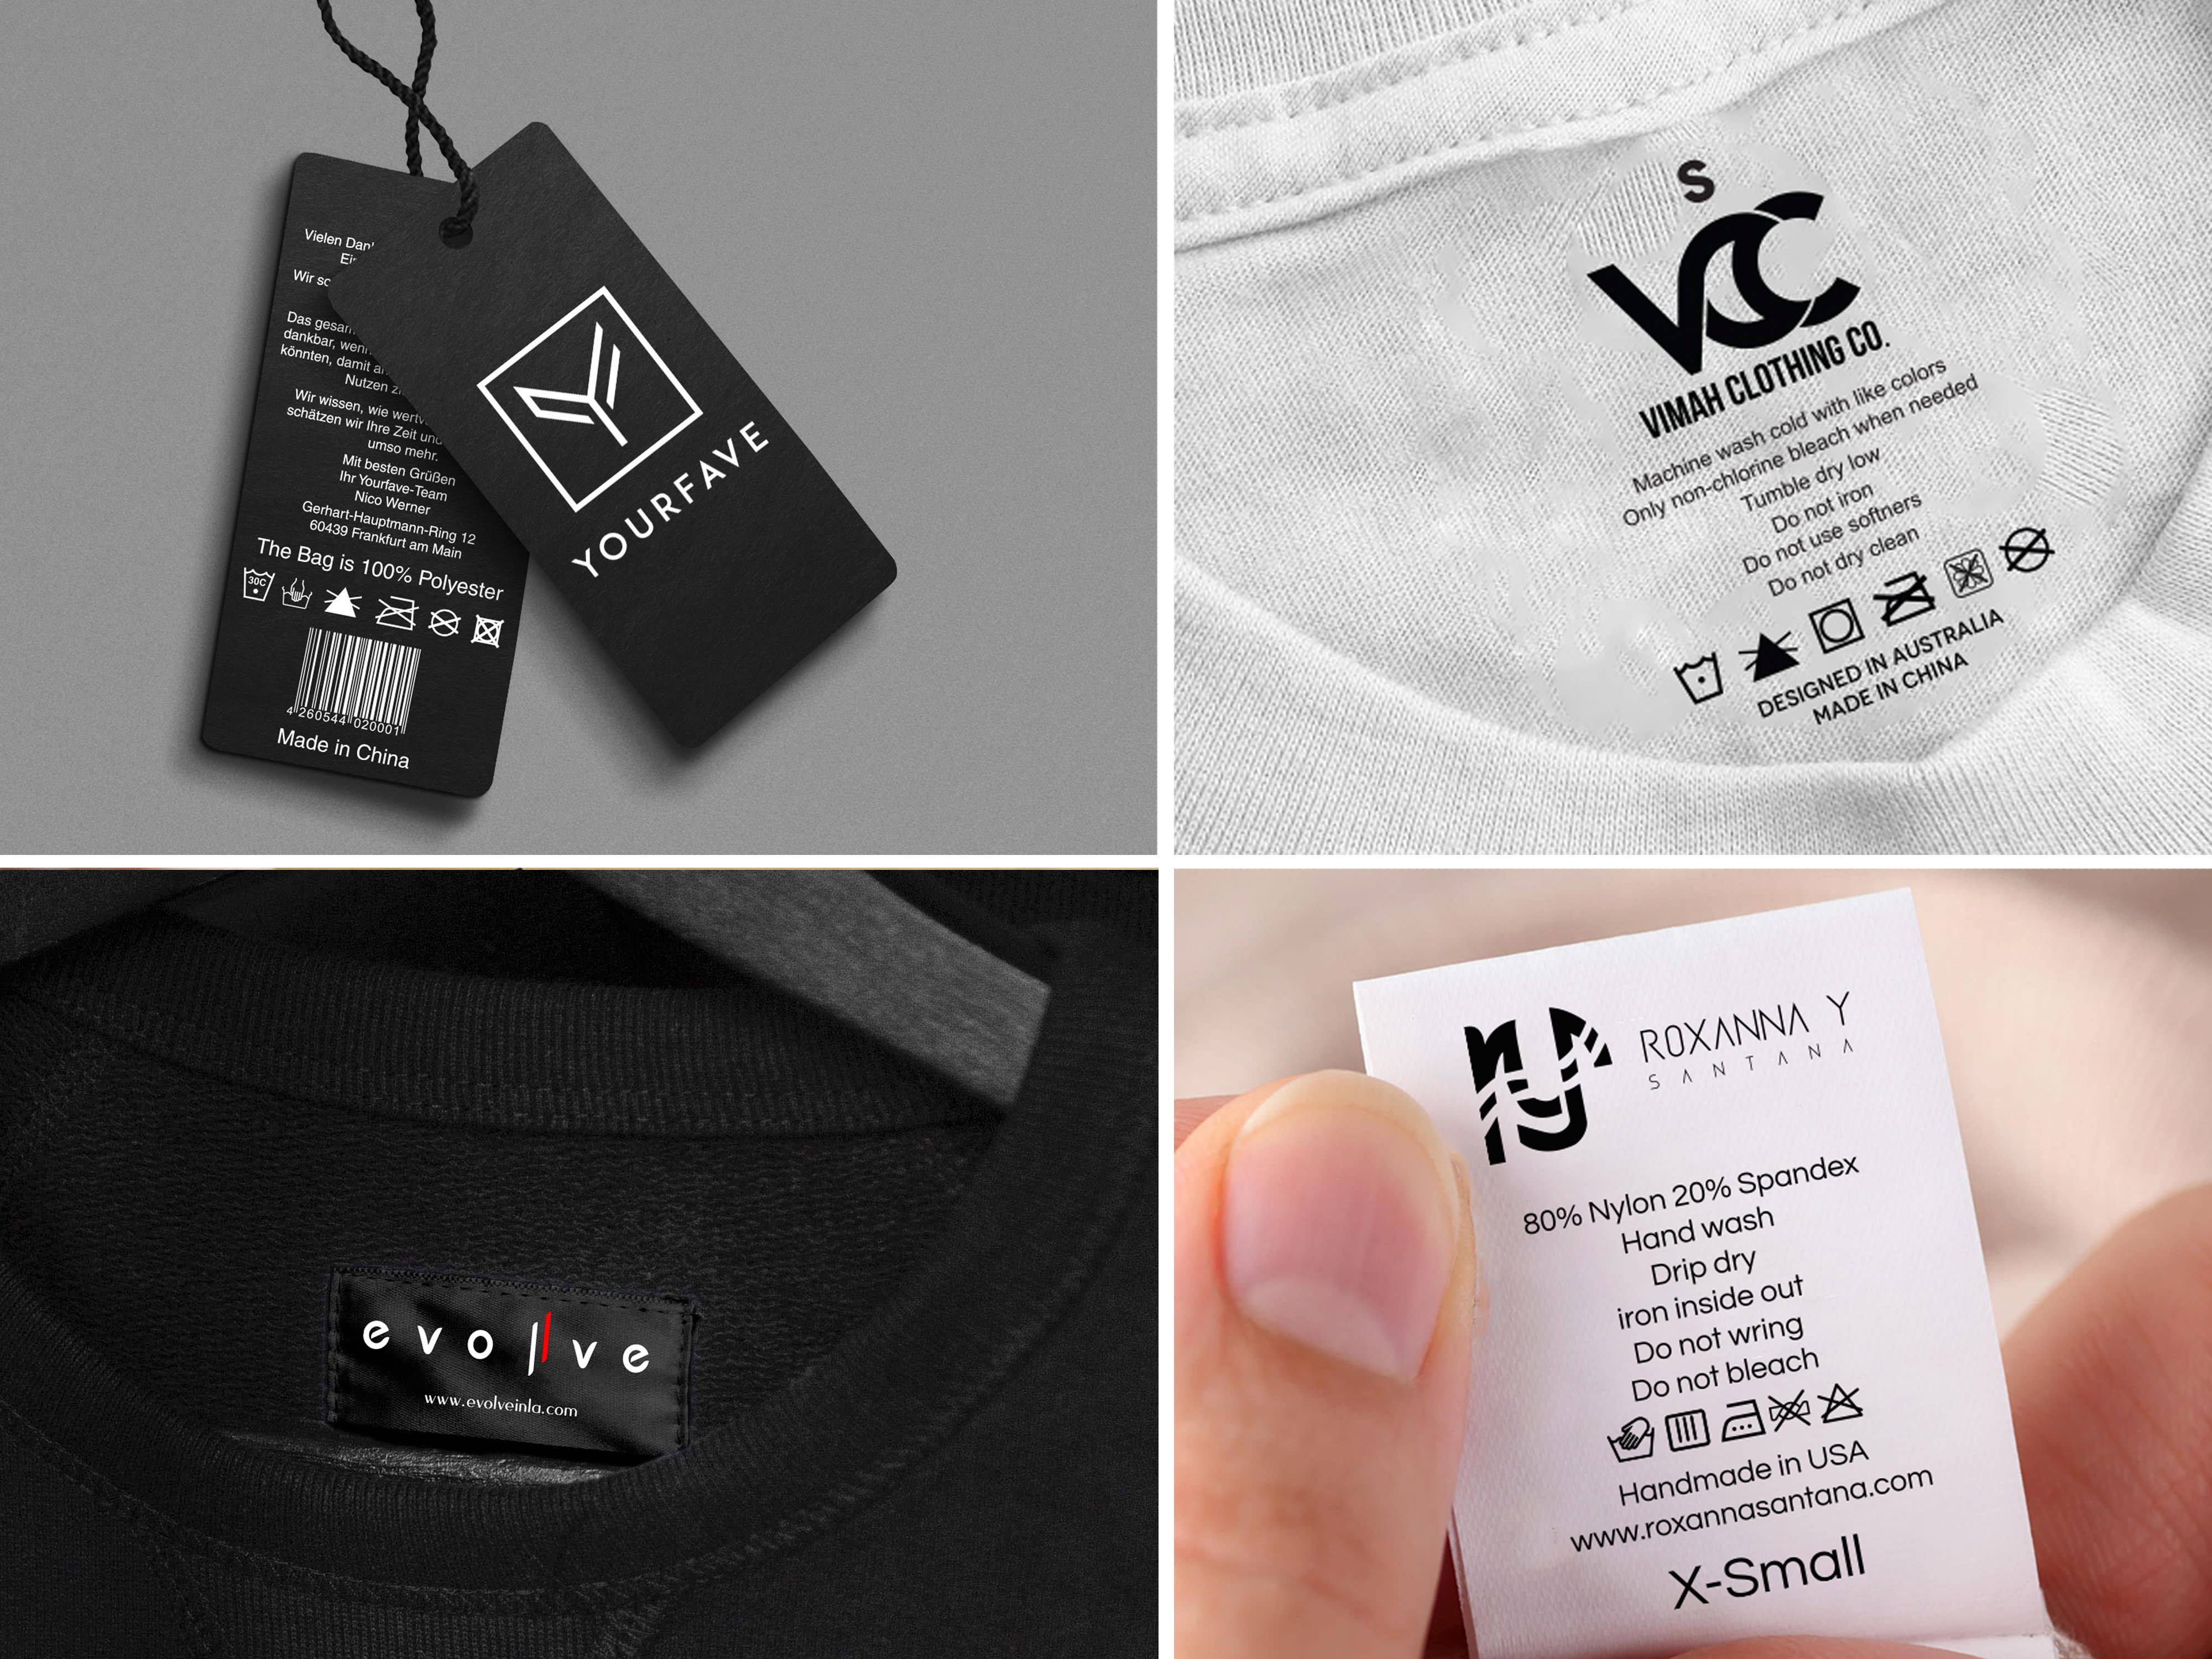 Design clothing label, hang tag, neck label, care label and